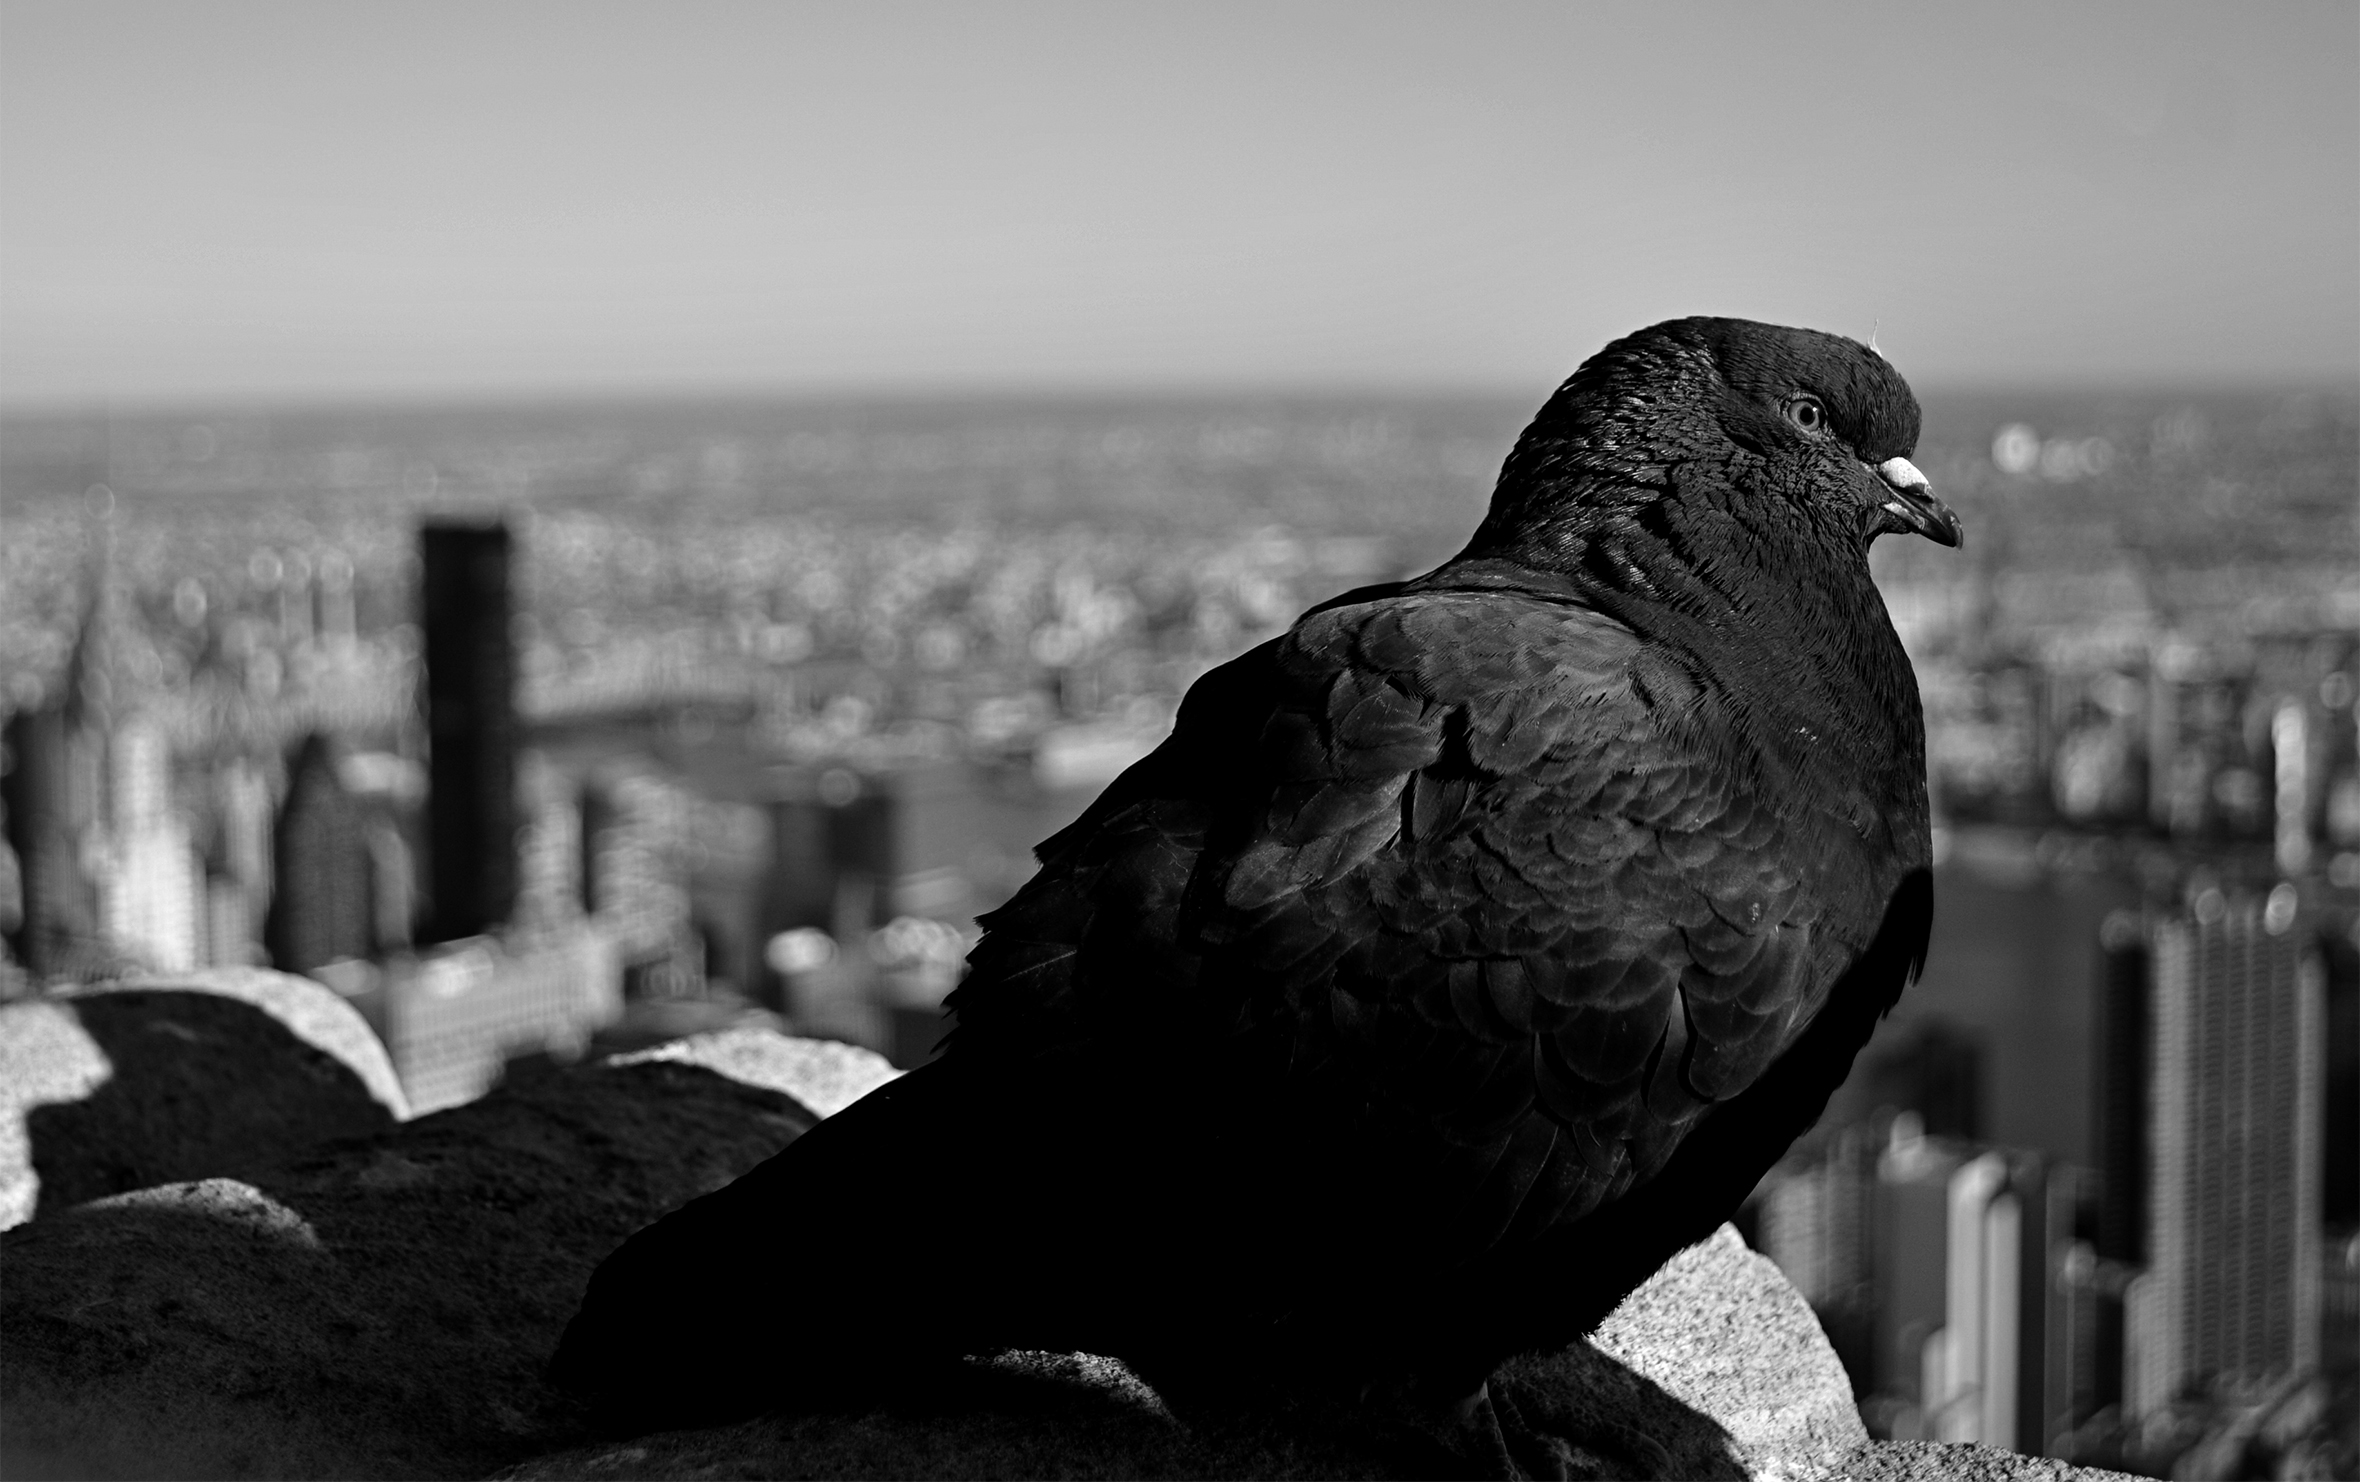 A pigeon sits atop a roof that is high enough to overlook the city that is blurred in the background.